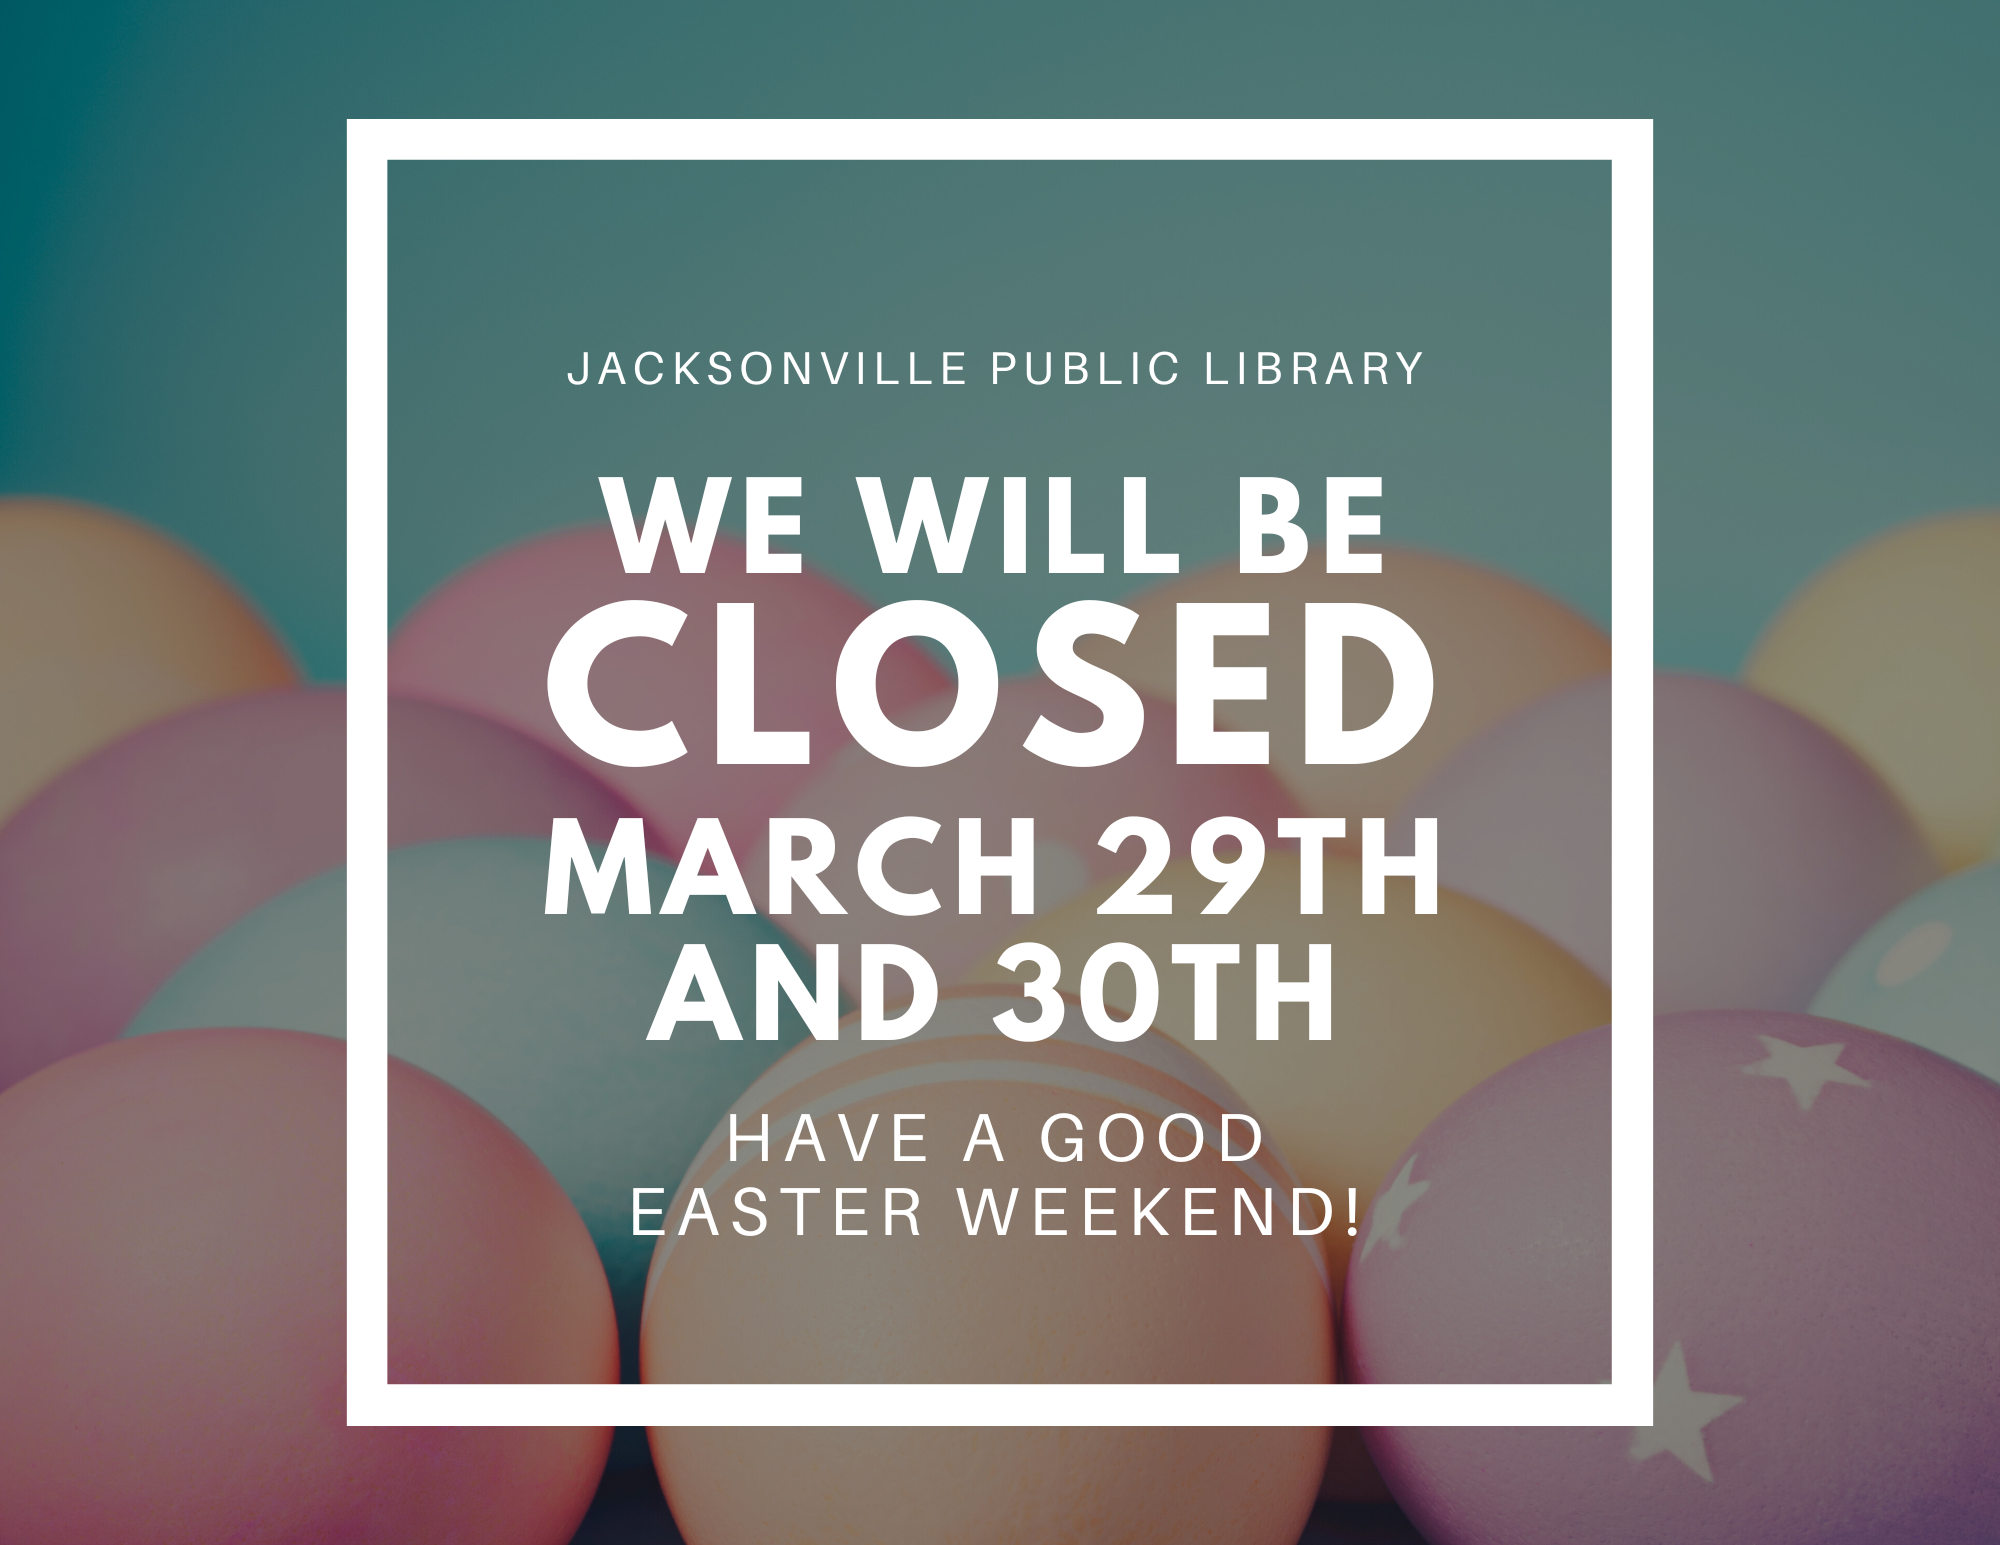 We will be closed March 29th and 30th. Happy Easter!